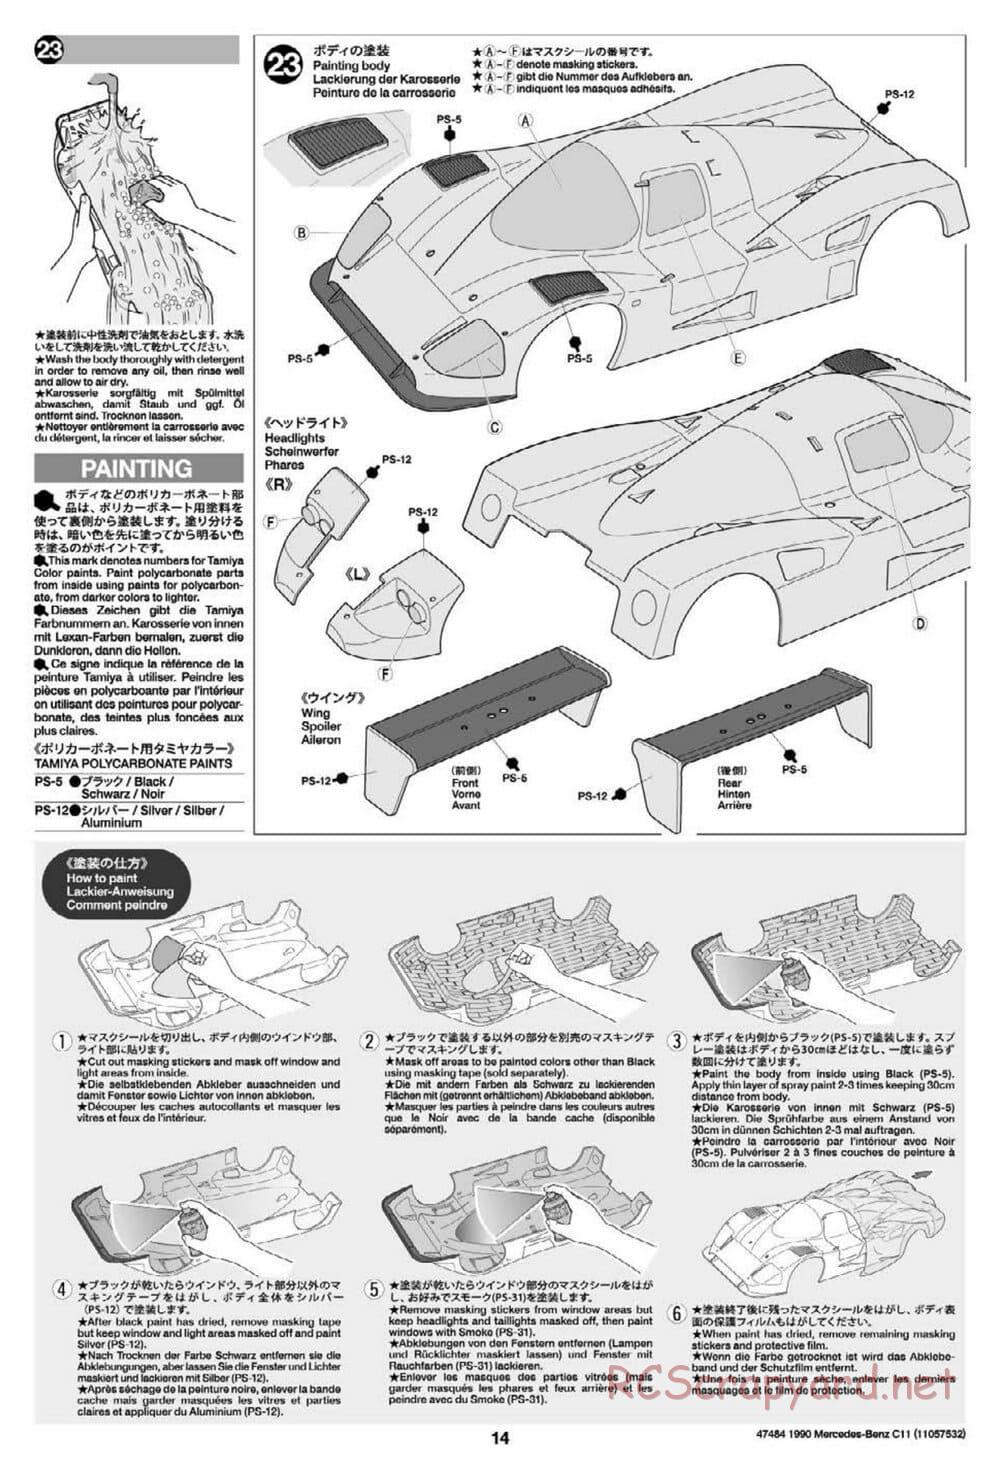 Tamiya - 1990 Mercedes-Benz C11 - Group-C Chassis - Manual - Page 14